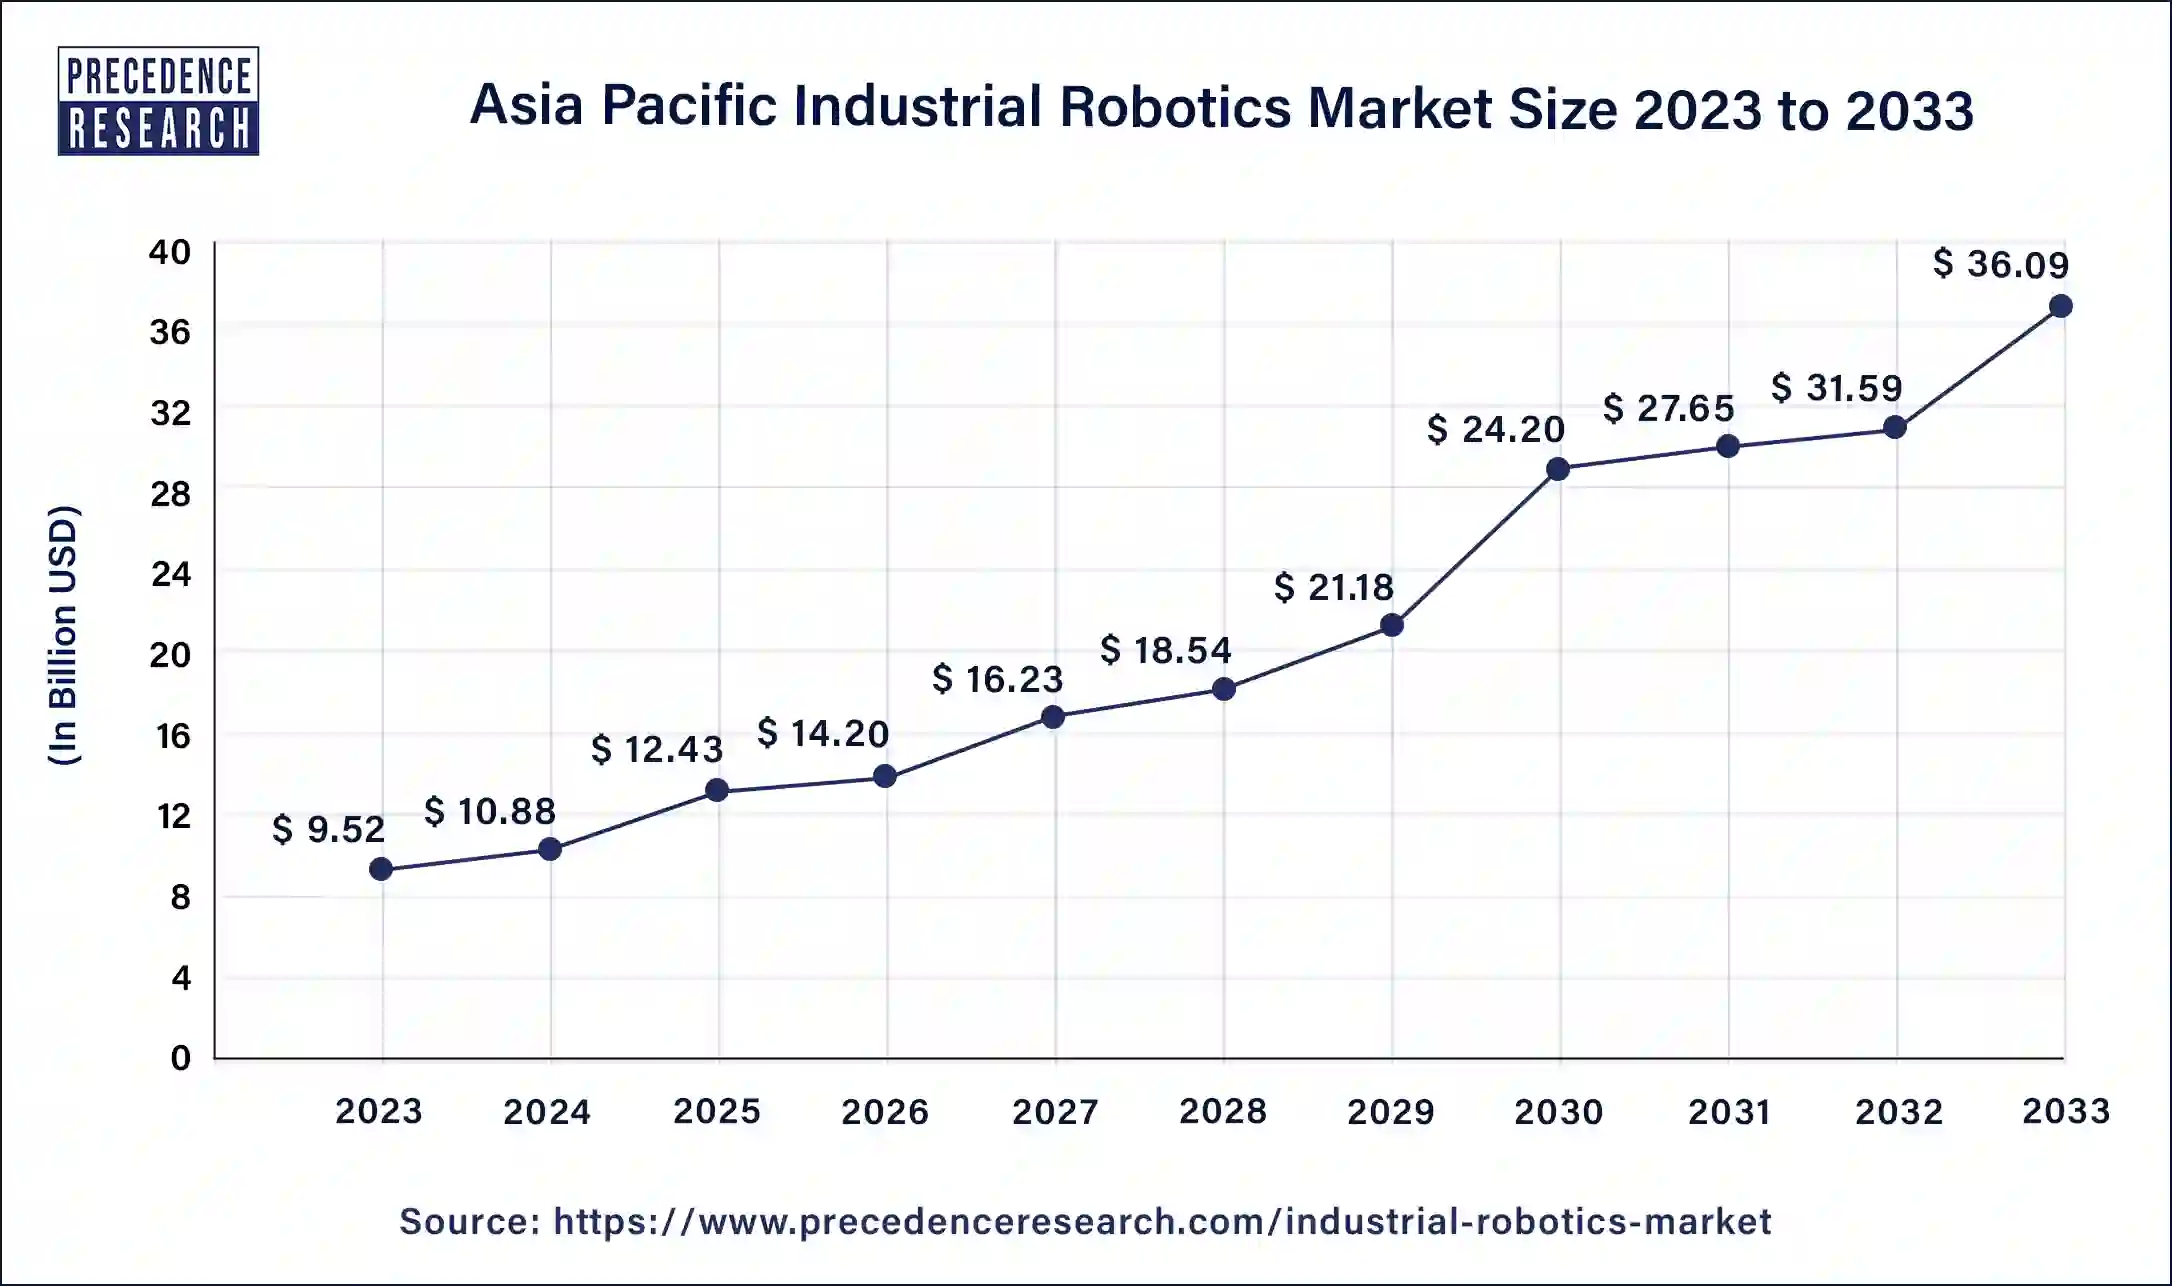 Asia Pacific Industrial Robotics Market Size 2024 to 2033